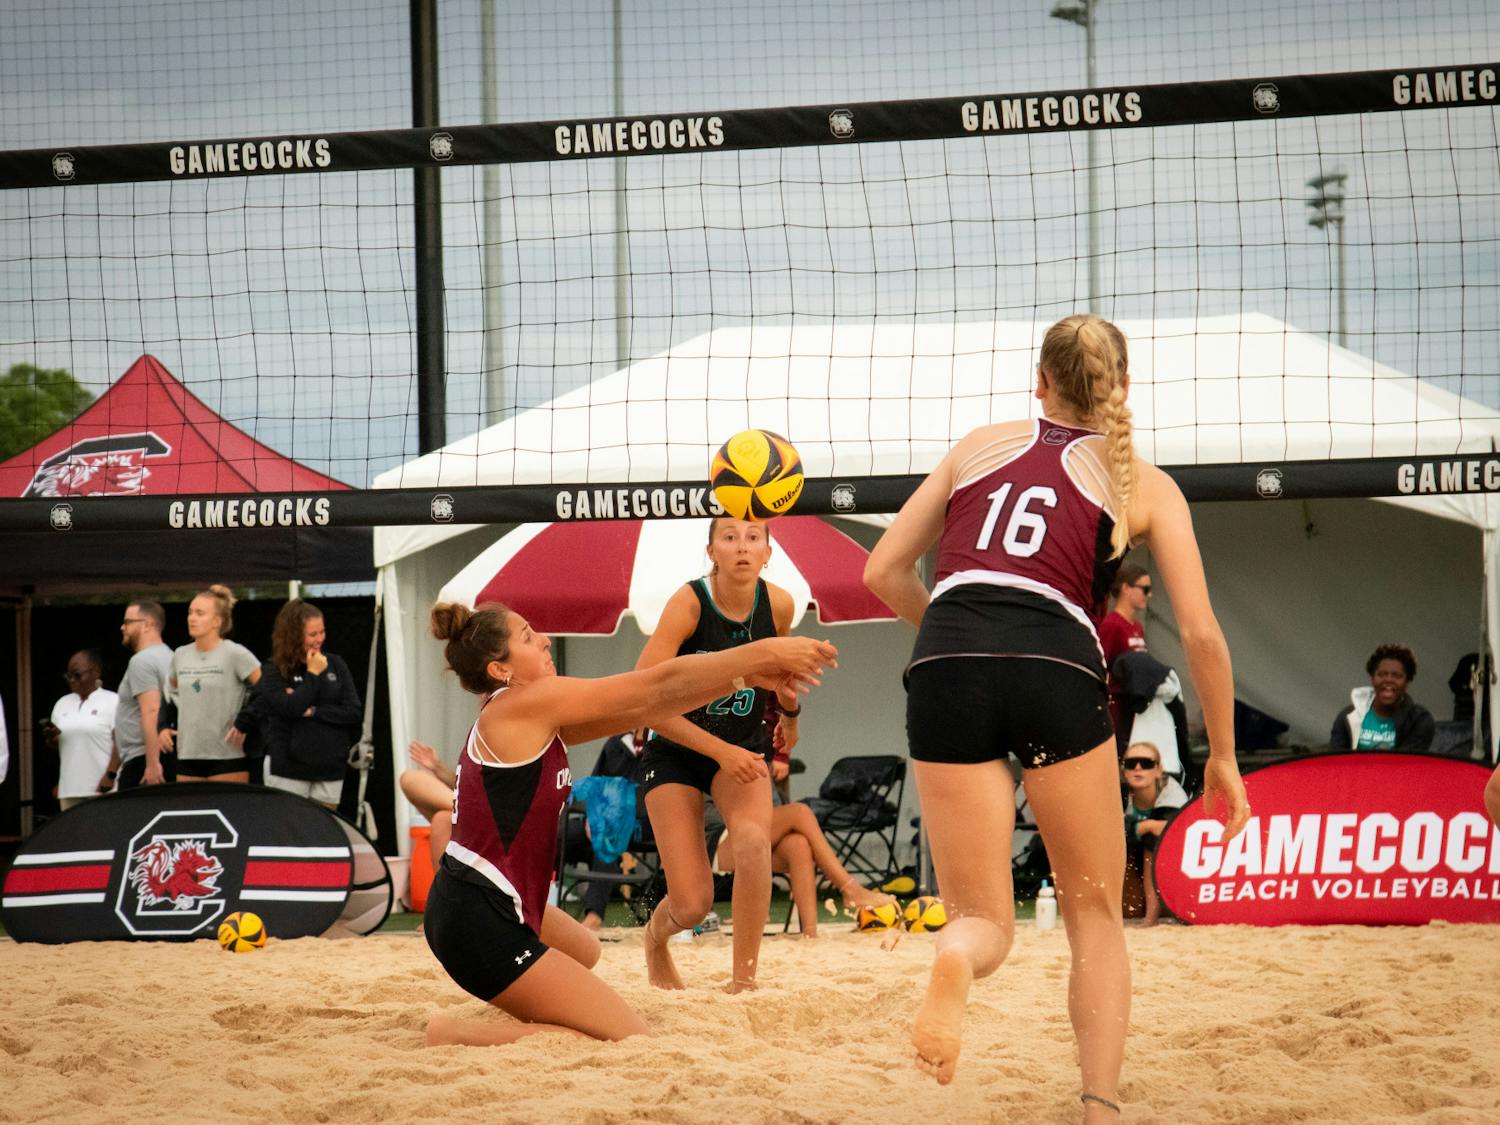 Freshman Jolie Cranford lunges for the ball in her match-up against Coastal Carolina on April 14, 2023. Cranford and teammate sophomore Kennedy Westendorff were able to score another point for the Gamecocks.